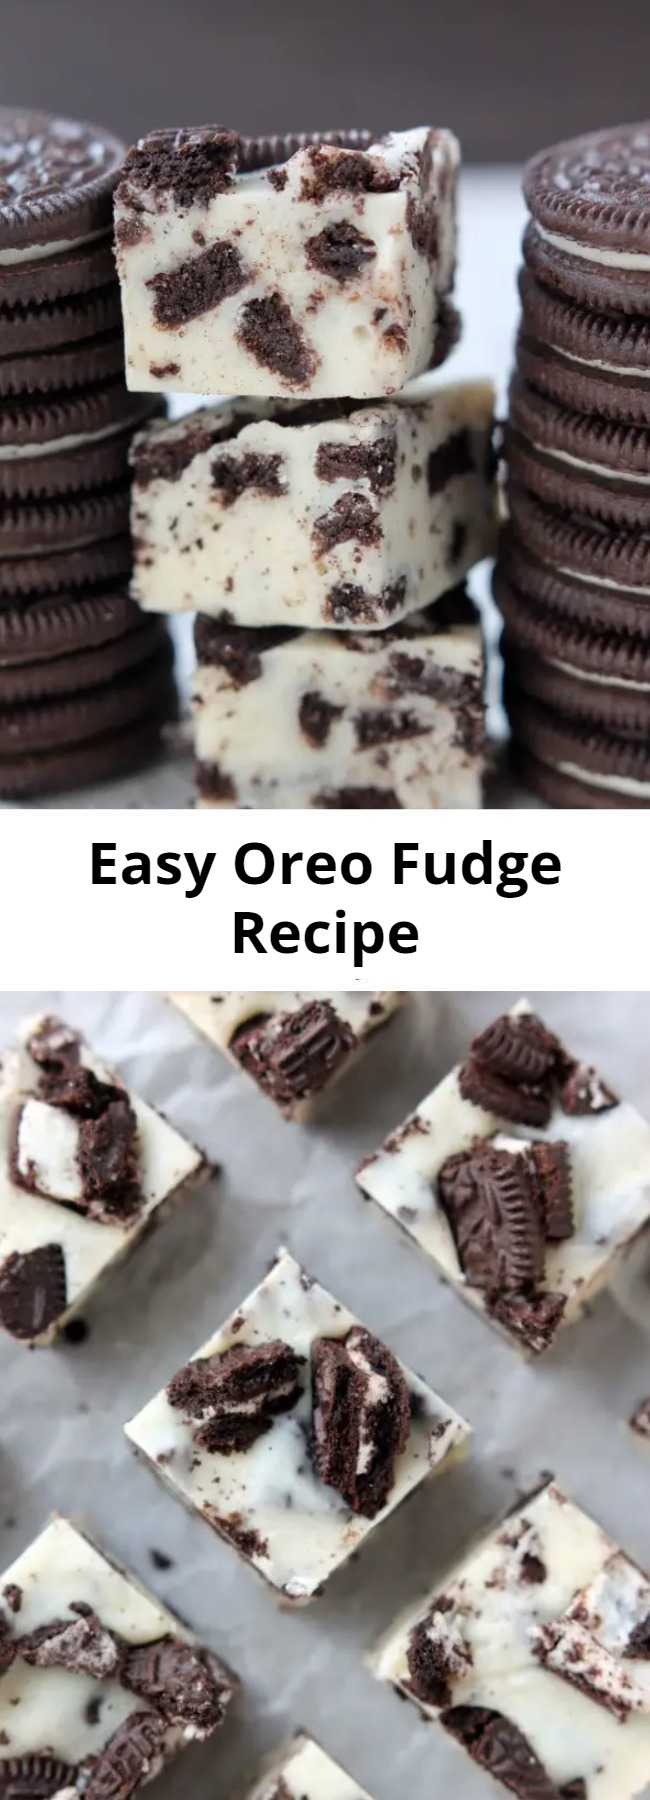 Easy Oreo Fudge Recipe - This Oreo Fudge whips up fast, with only 3 ingredients! Perfect for Christmas neighbor plates!